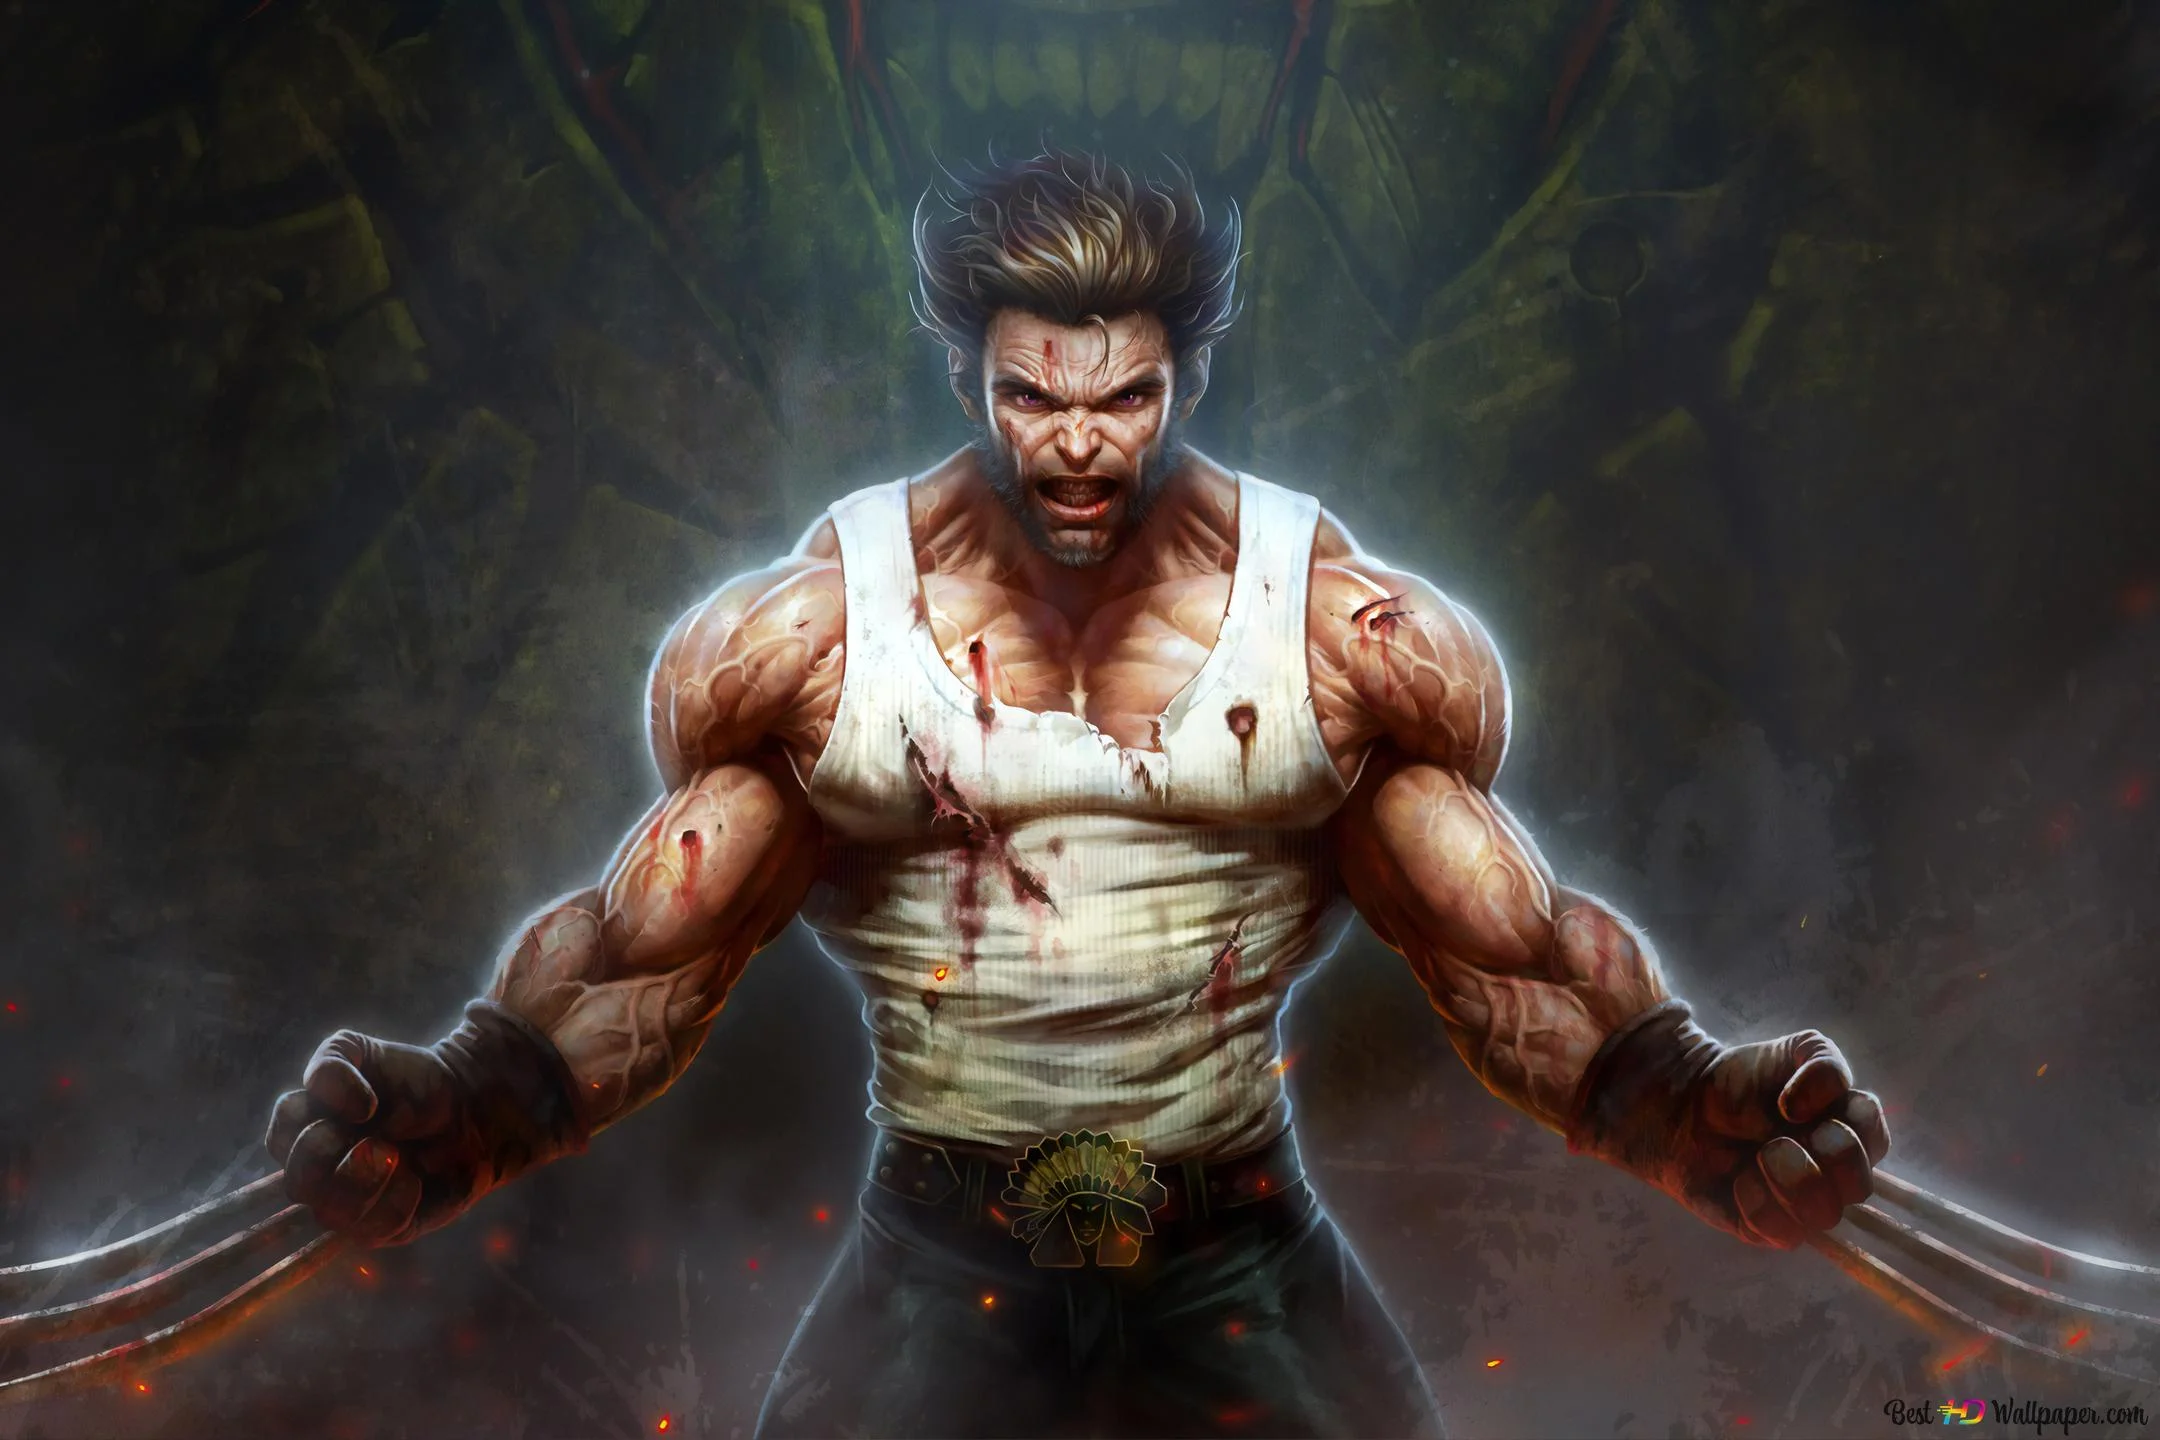 Another Marvel's Wolverine gameplay video leaked online